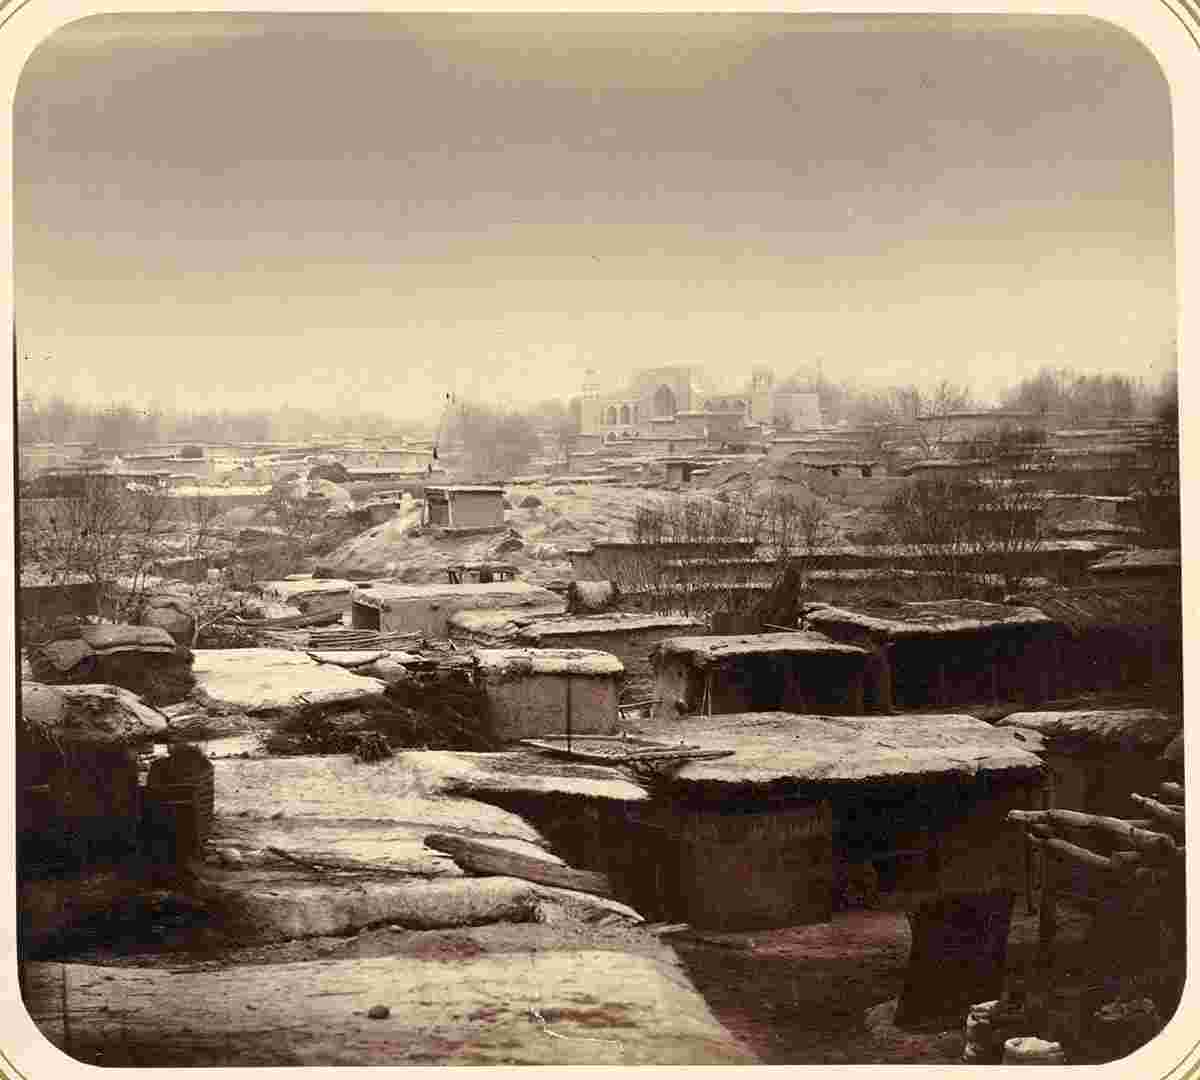 Tashkent. Part of the city and Beglyar Beg madrasa, between 1865 and 1872